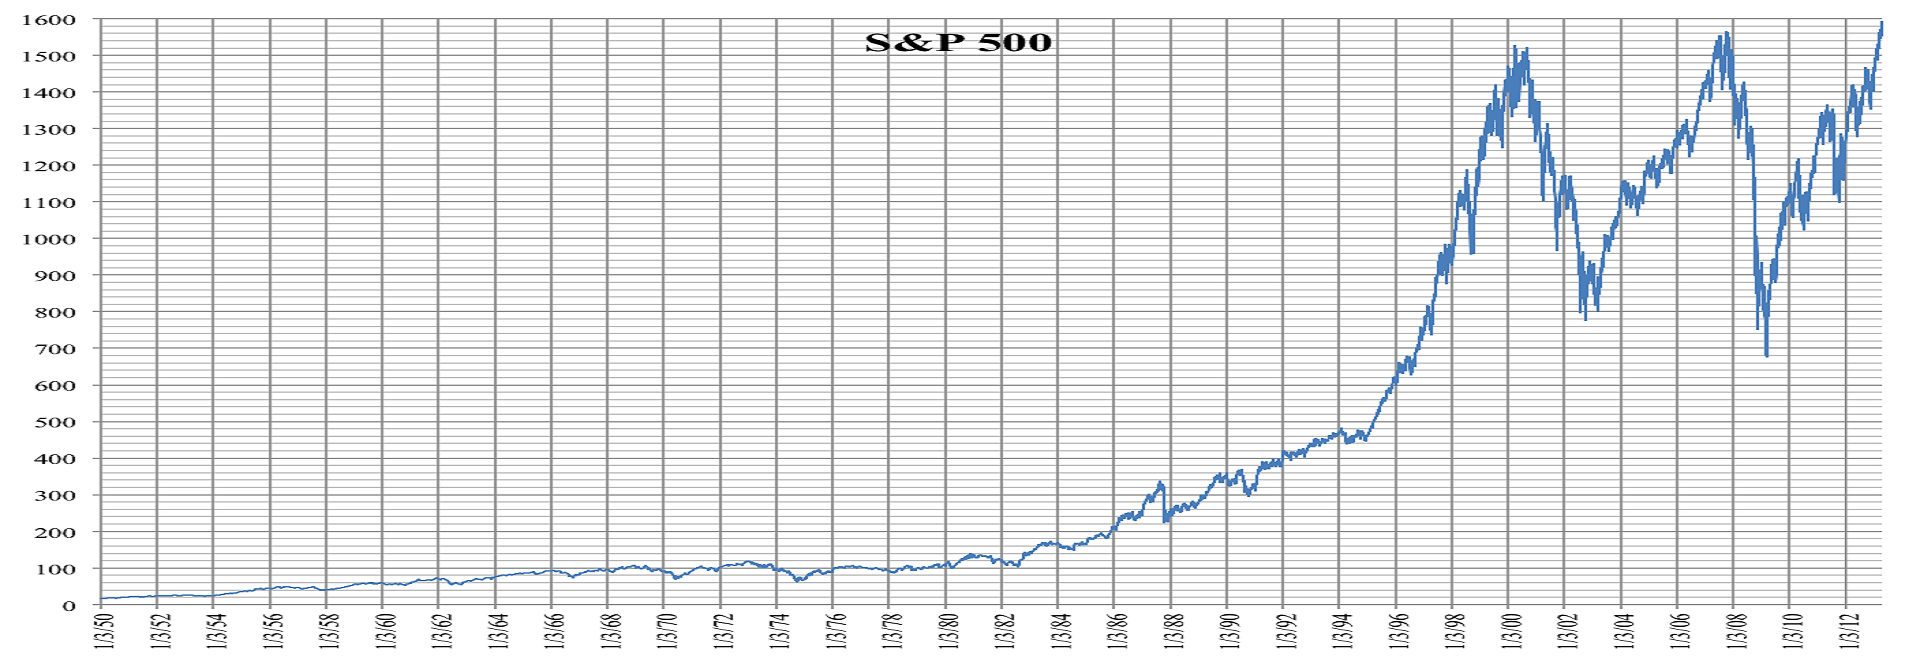 Daily Linear Chart of SP 500 from 1950 to 2013 - اخبار یکشنیه مورخ 98/7/14